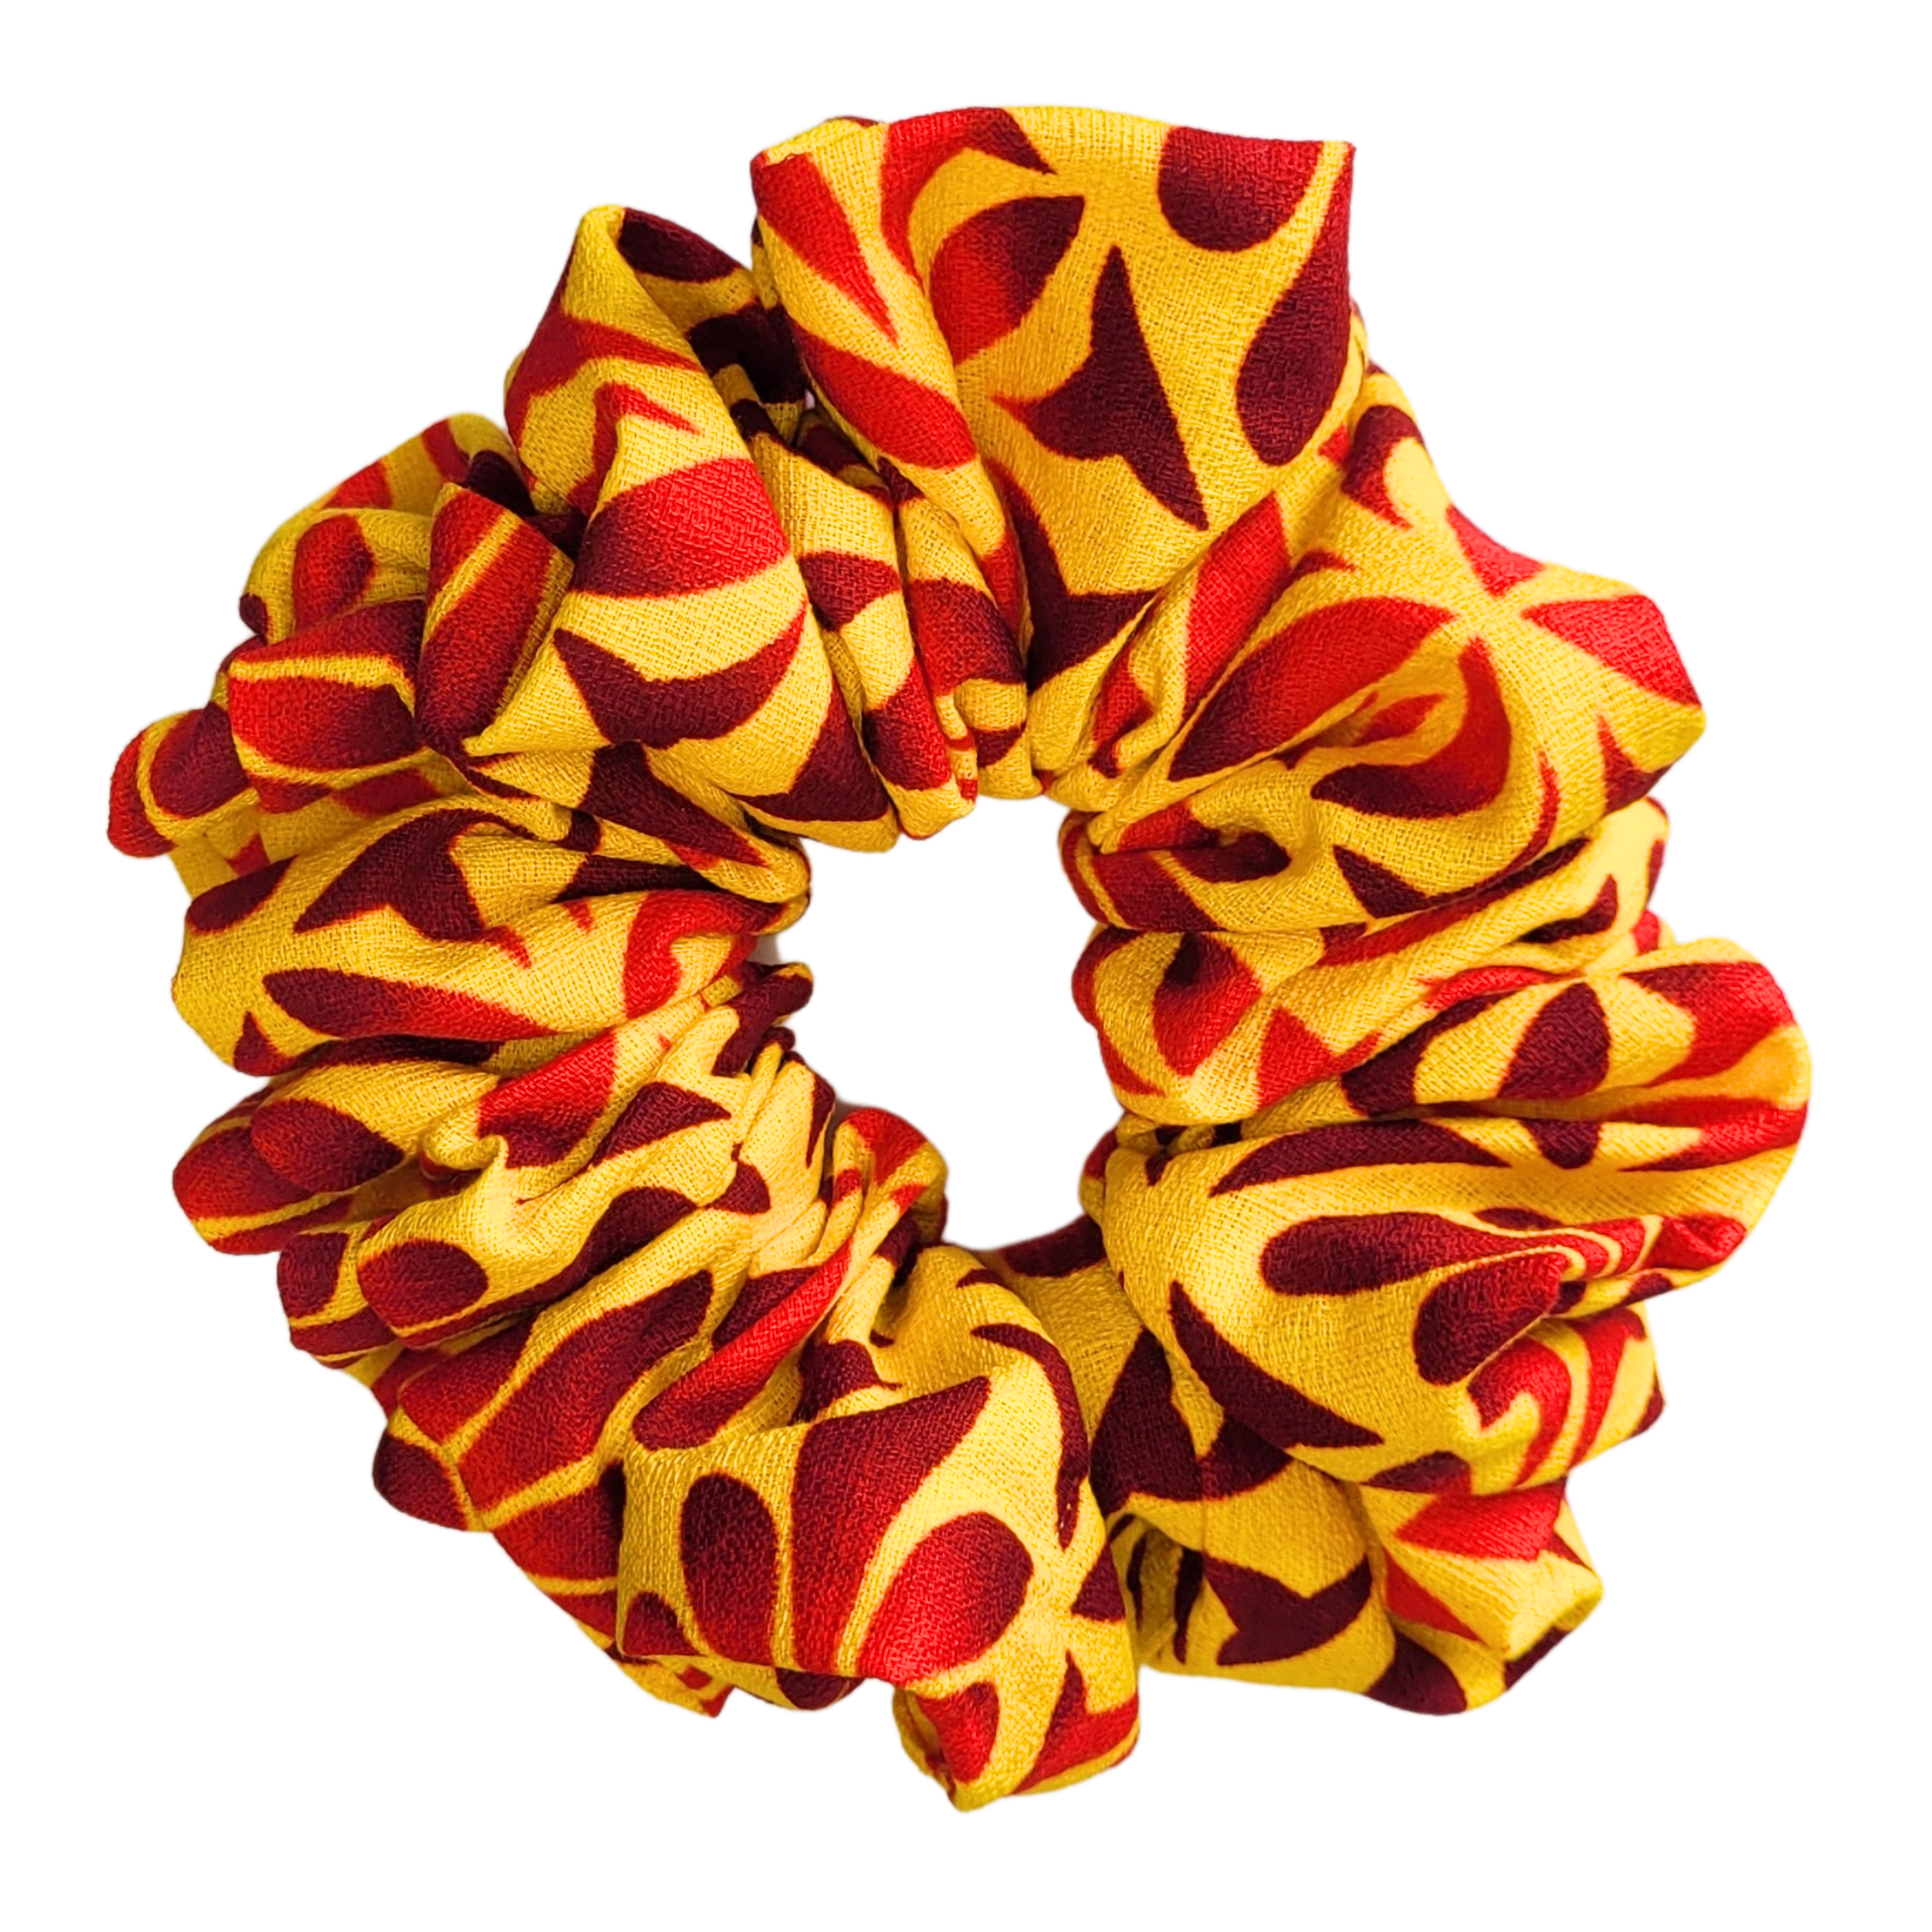 Pasifika hair scrunchies. made from cotton. pacific island pattered fabric. sizes available small, medium, large and extra large. this style is yellow red